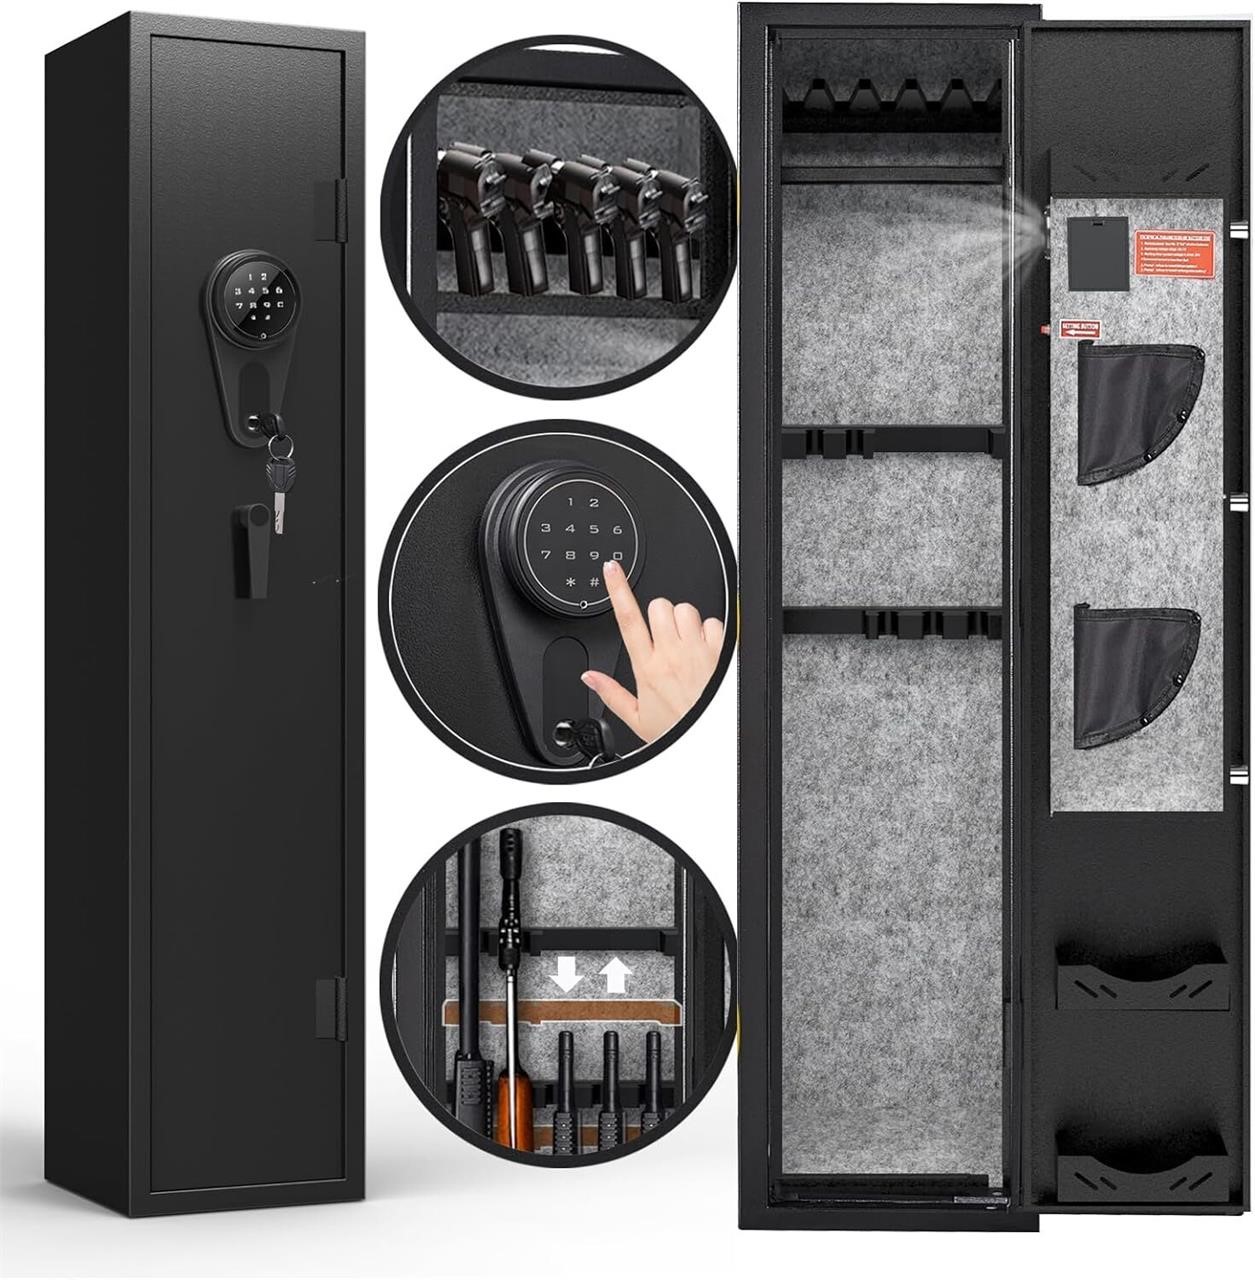 KAER 3-5 Gun Safes for Home Rifle and Pistols  Qui